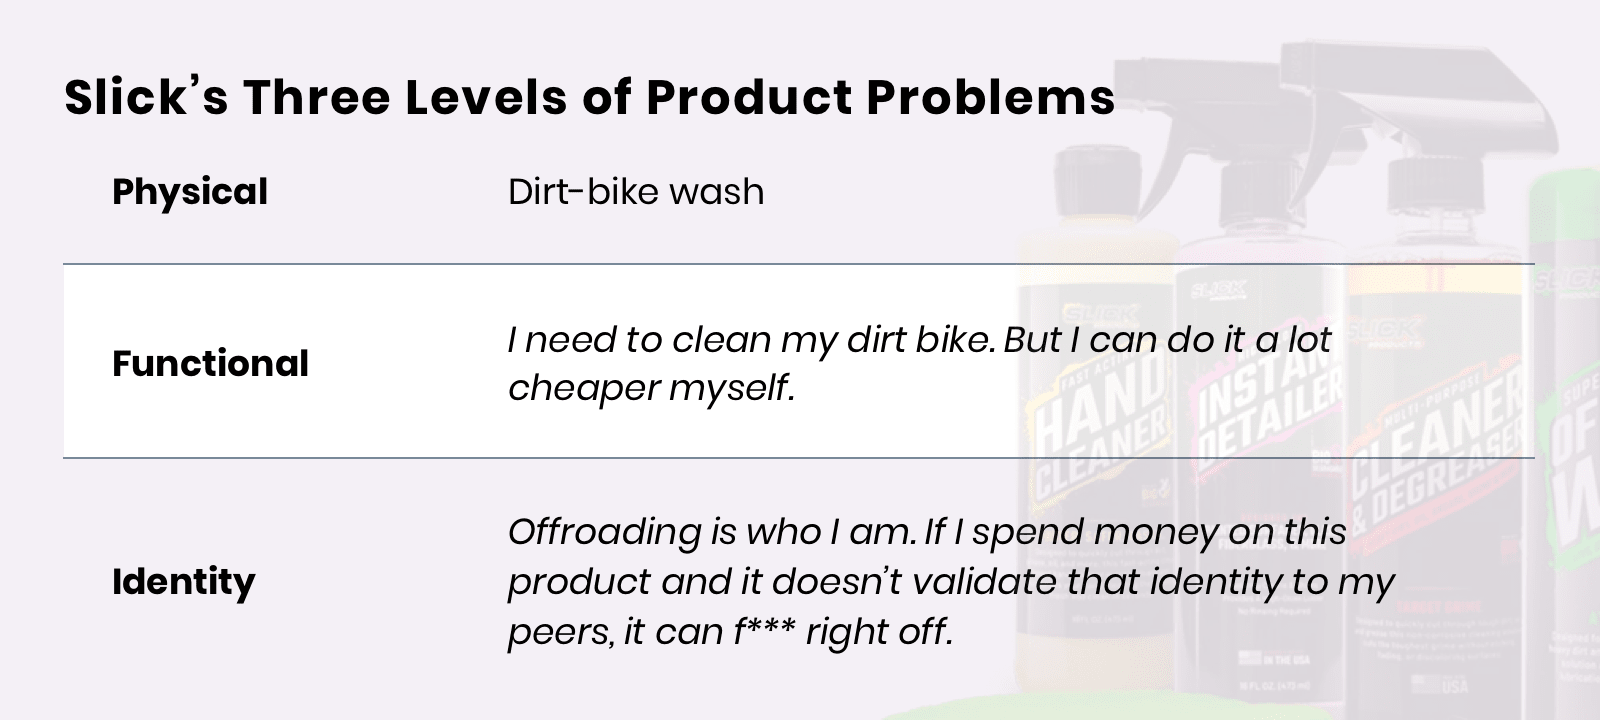 Slick’s Three Levels of Product Problems
